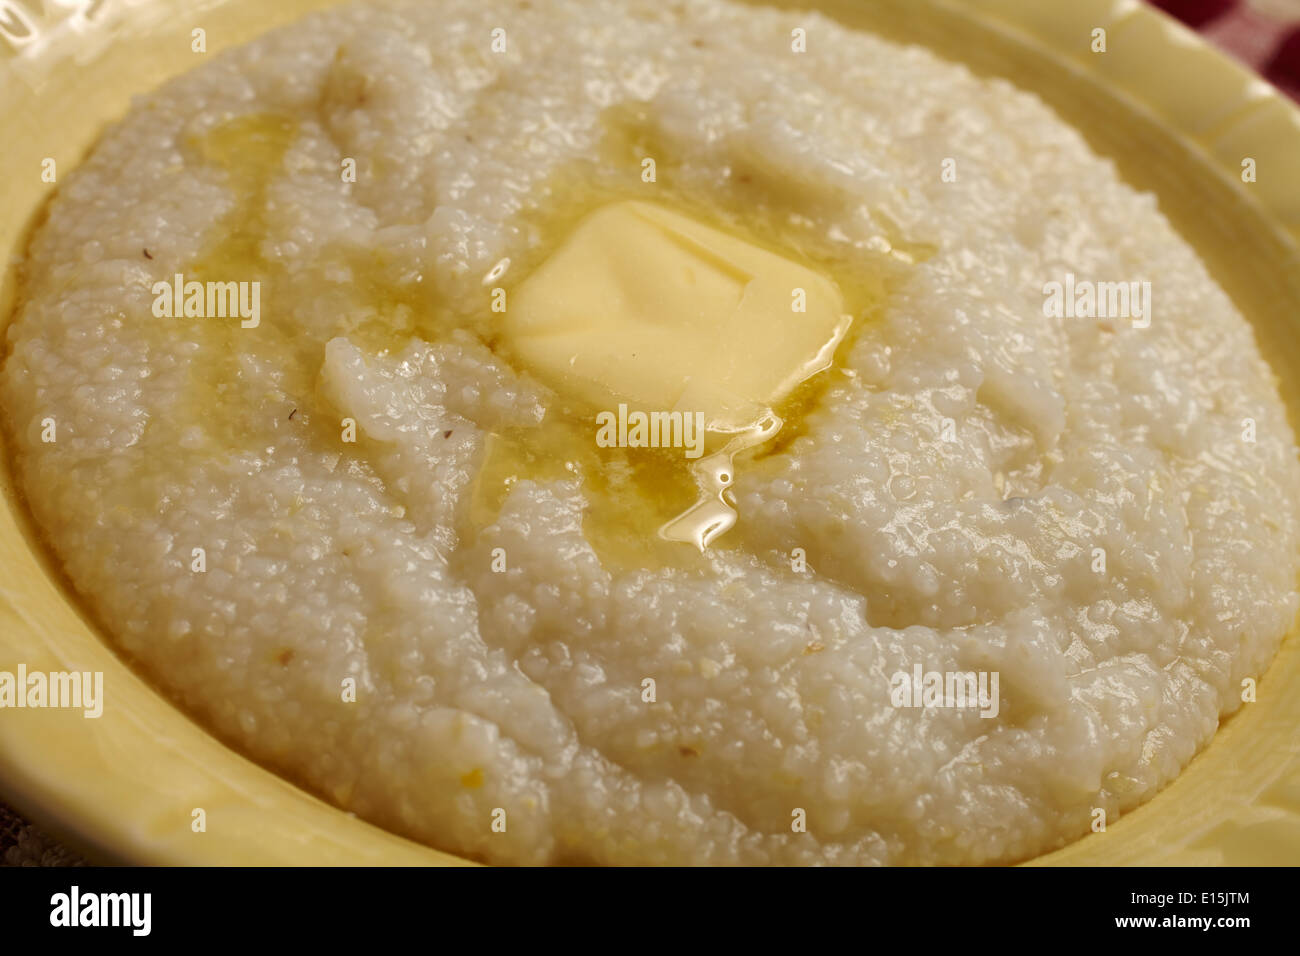 Bowl of hominy grits with a pat of butter Stock Photo